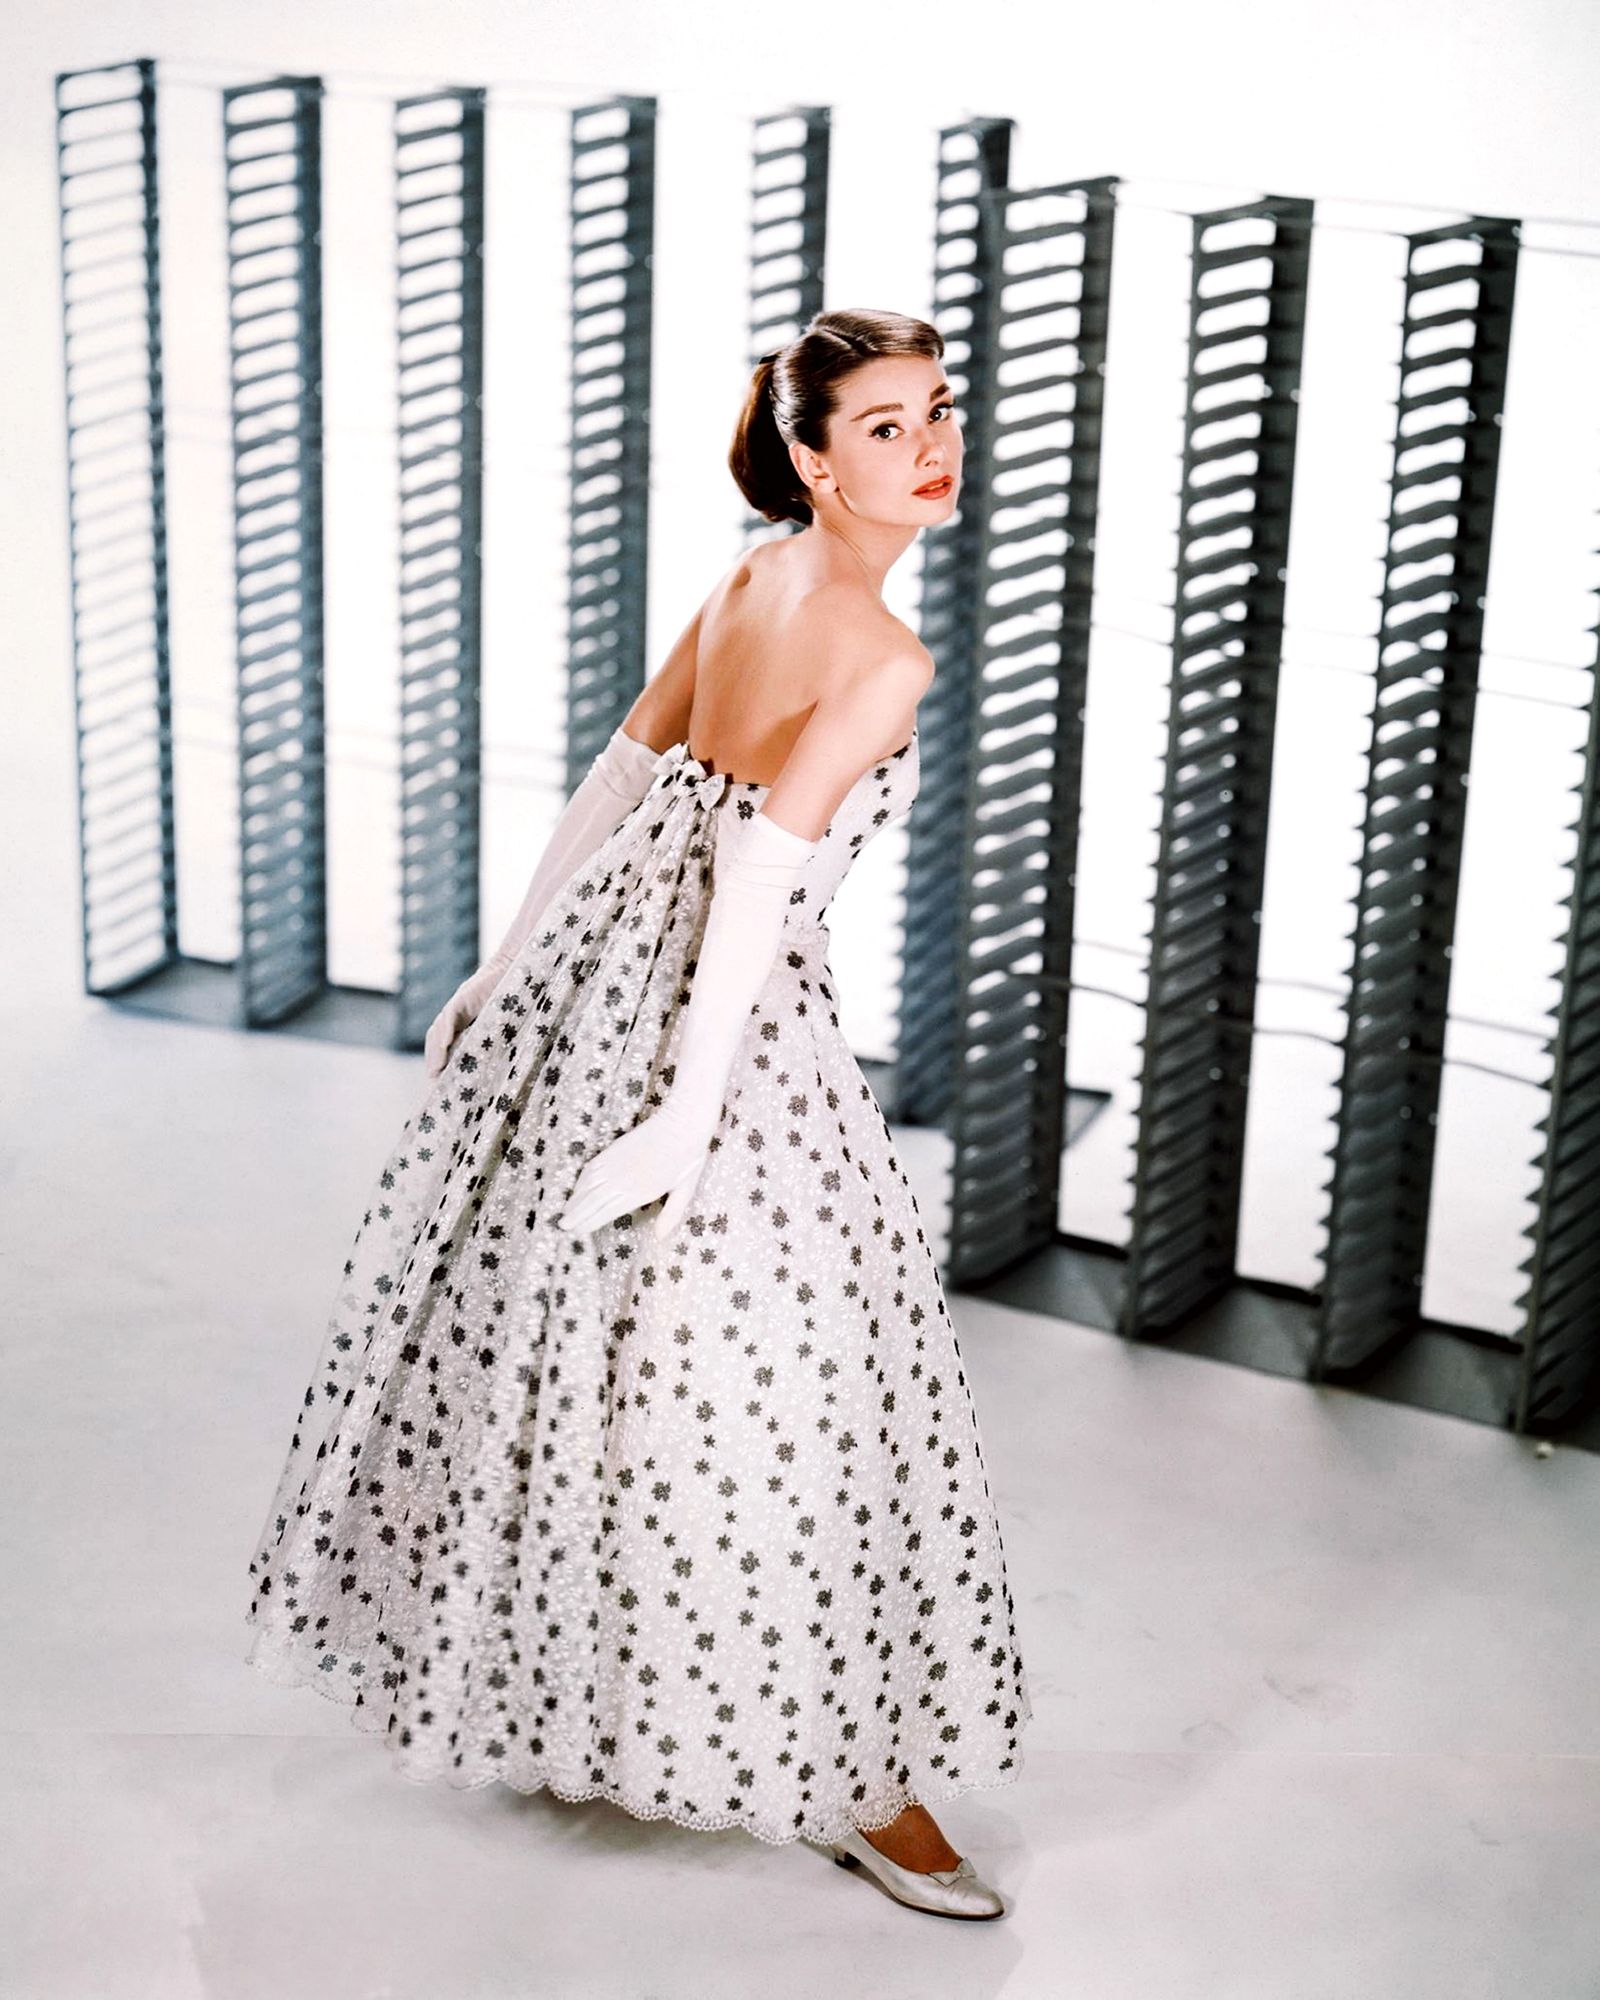 Audrey Hepburn's Best Givenchy Style 